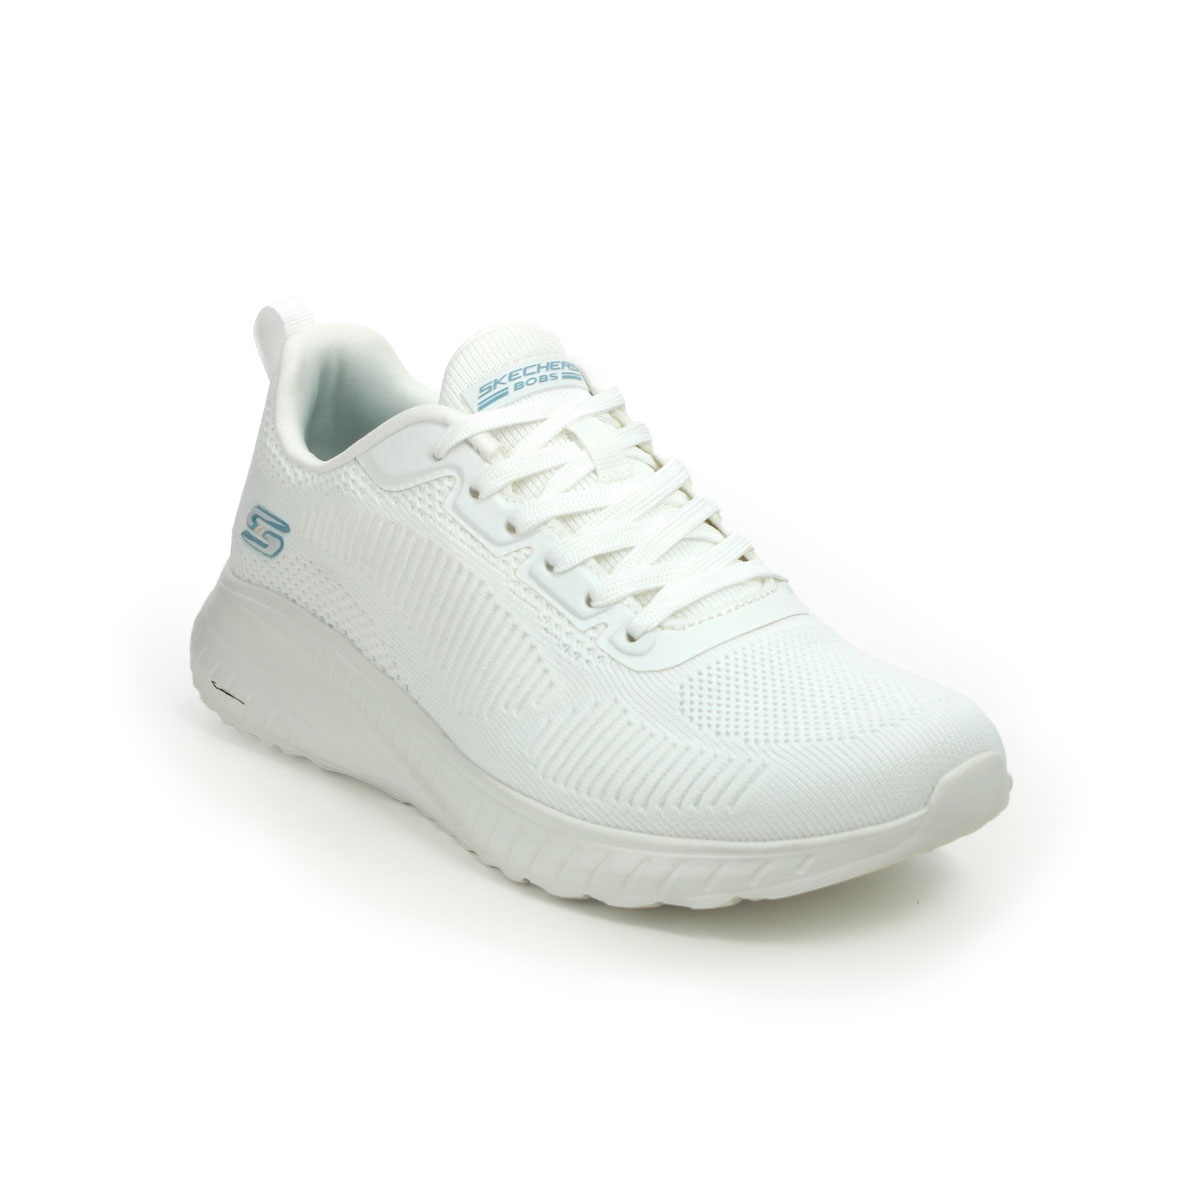 Skechers Bobs Squad Chaos OFWT Off white Womens trainers 117209 in a Plain Textile in Size 4